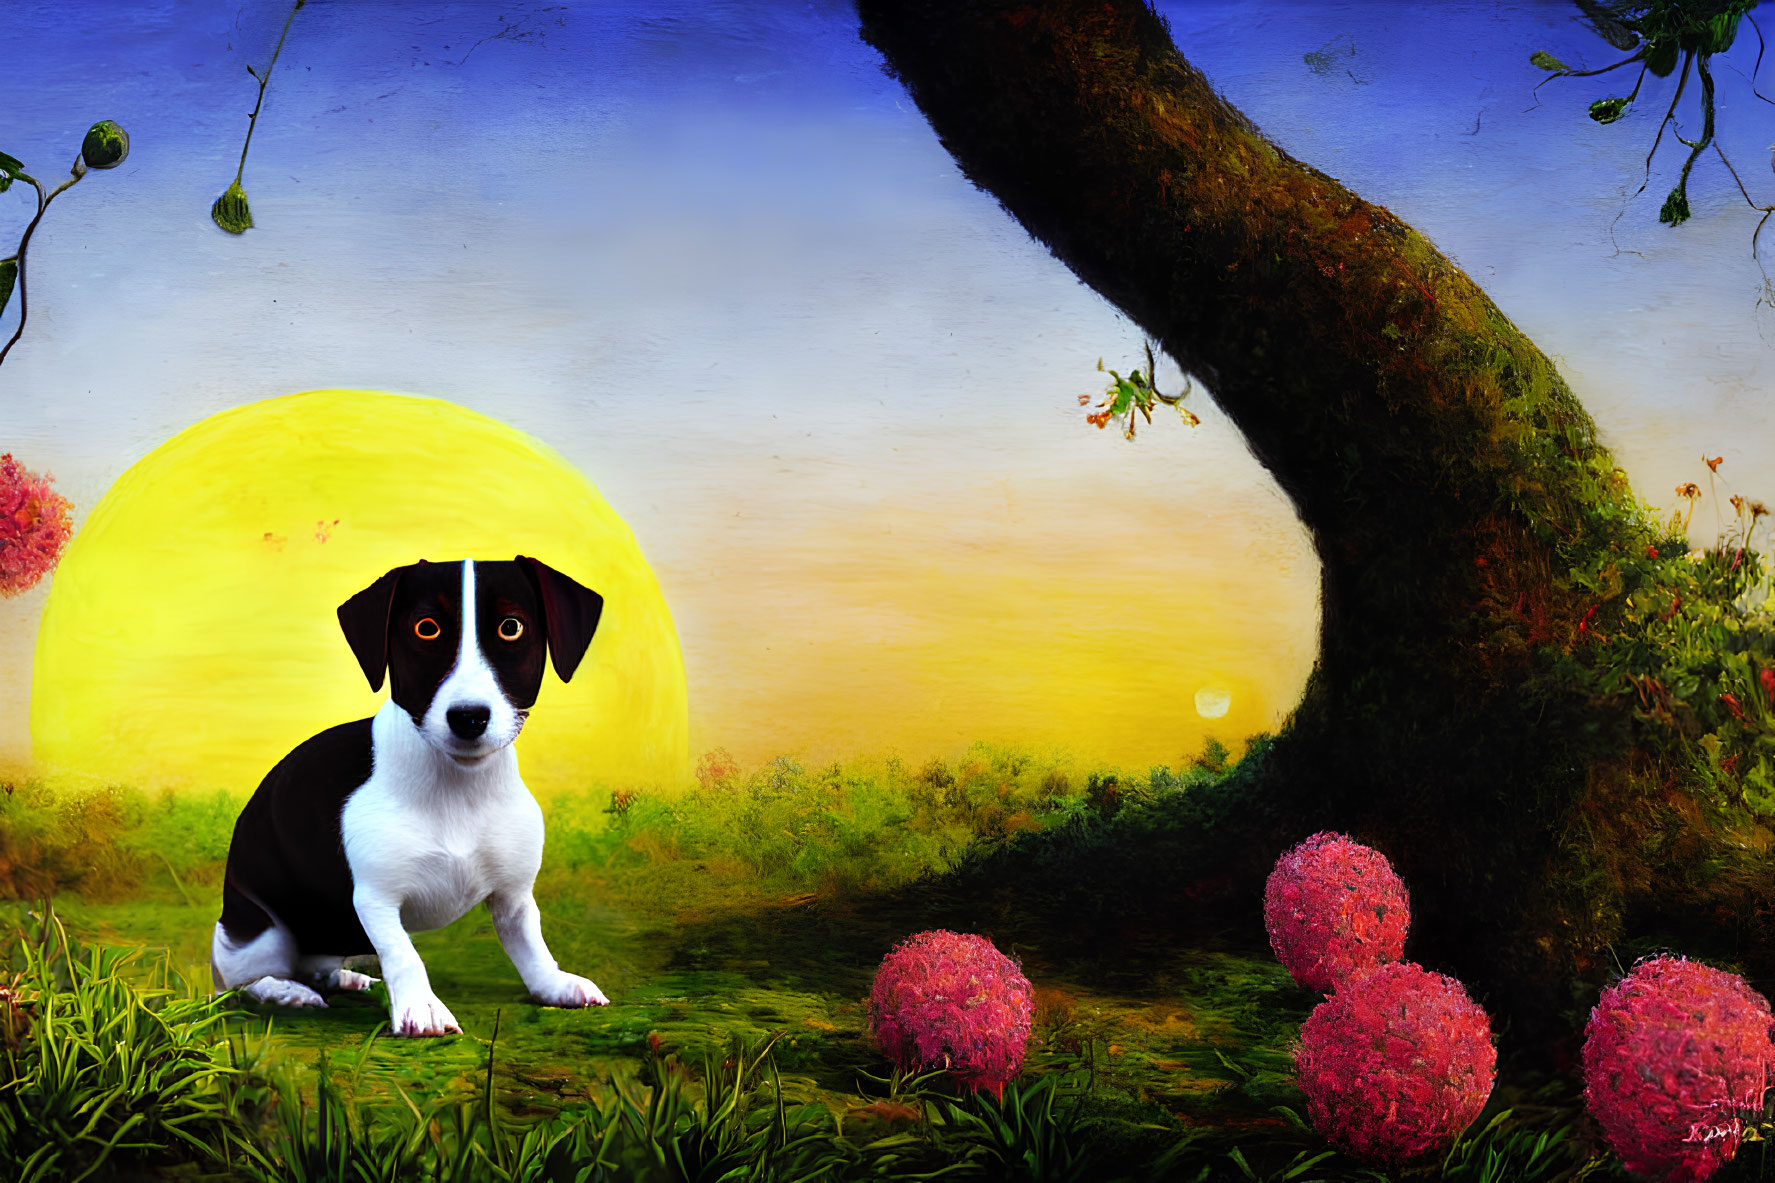 Black and white dog sitting on grass under yellow sun near tree with fruits and pink flowers